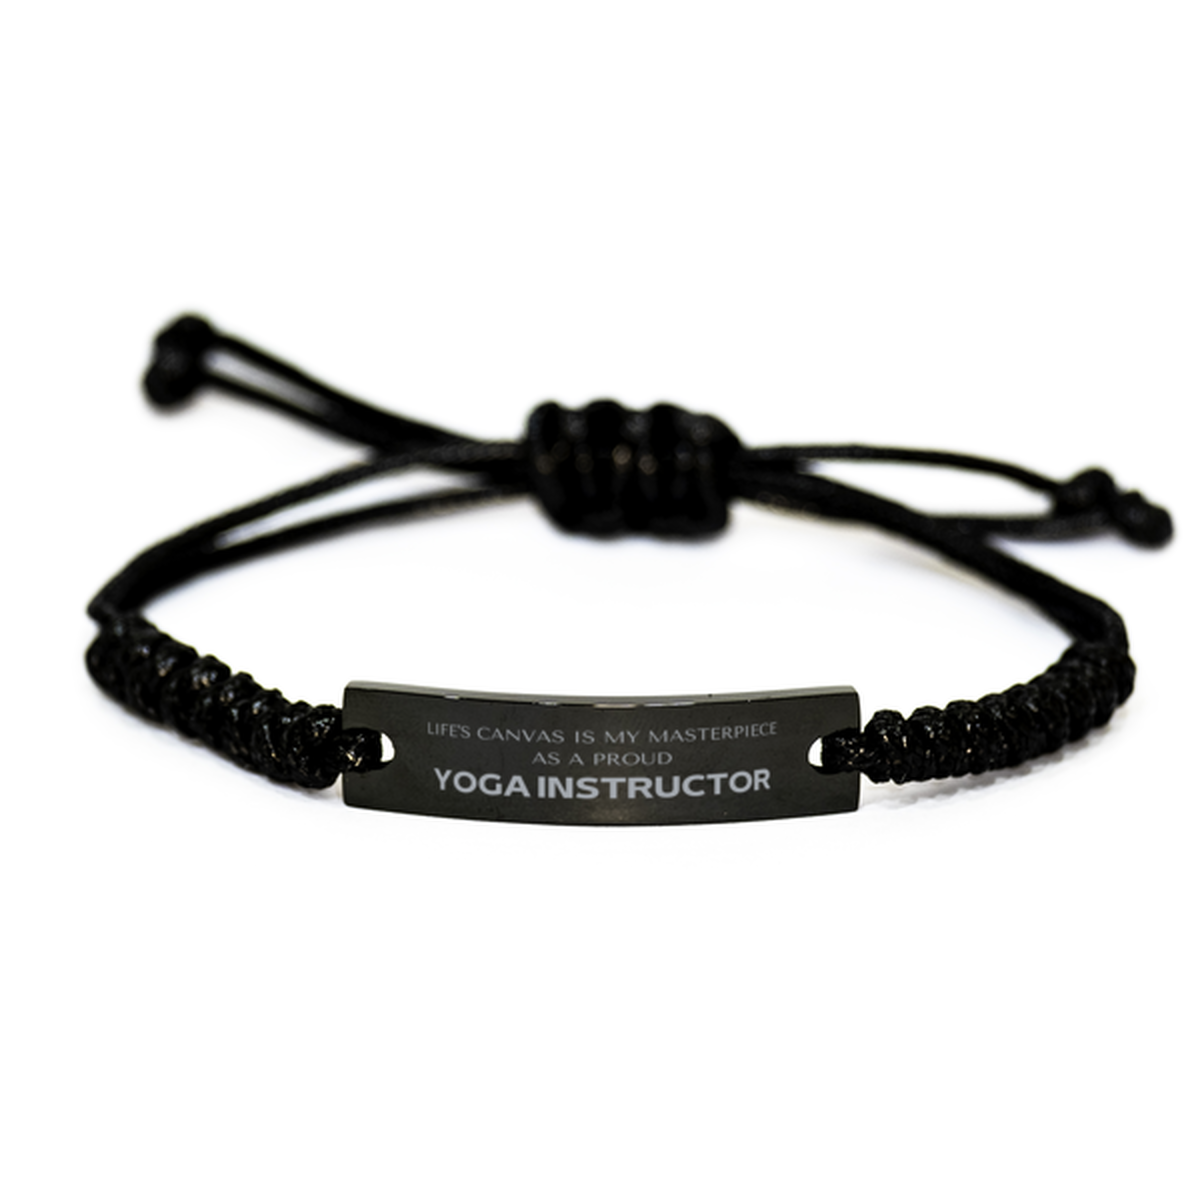 Proud Yoga Instructor Gifts, Life's canvas is my masterpiece, Epic Birthday Christmas Unique Black Rope Bracelet For Yoga Instructor, Coworkers, Men, Women, Friends